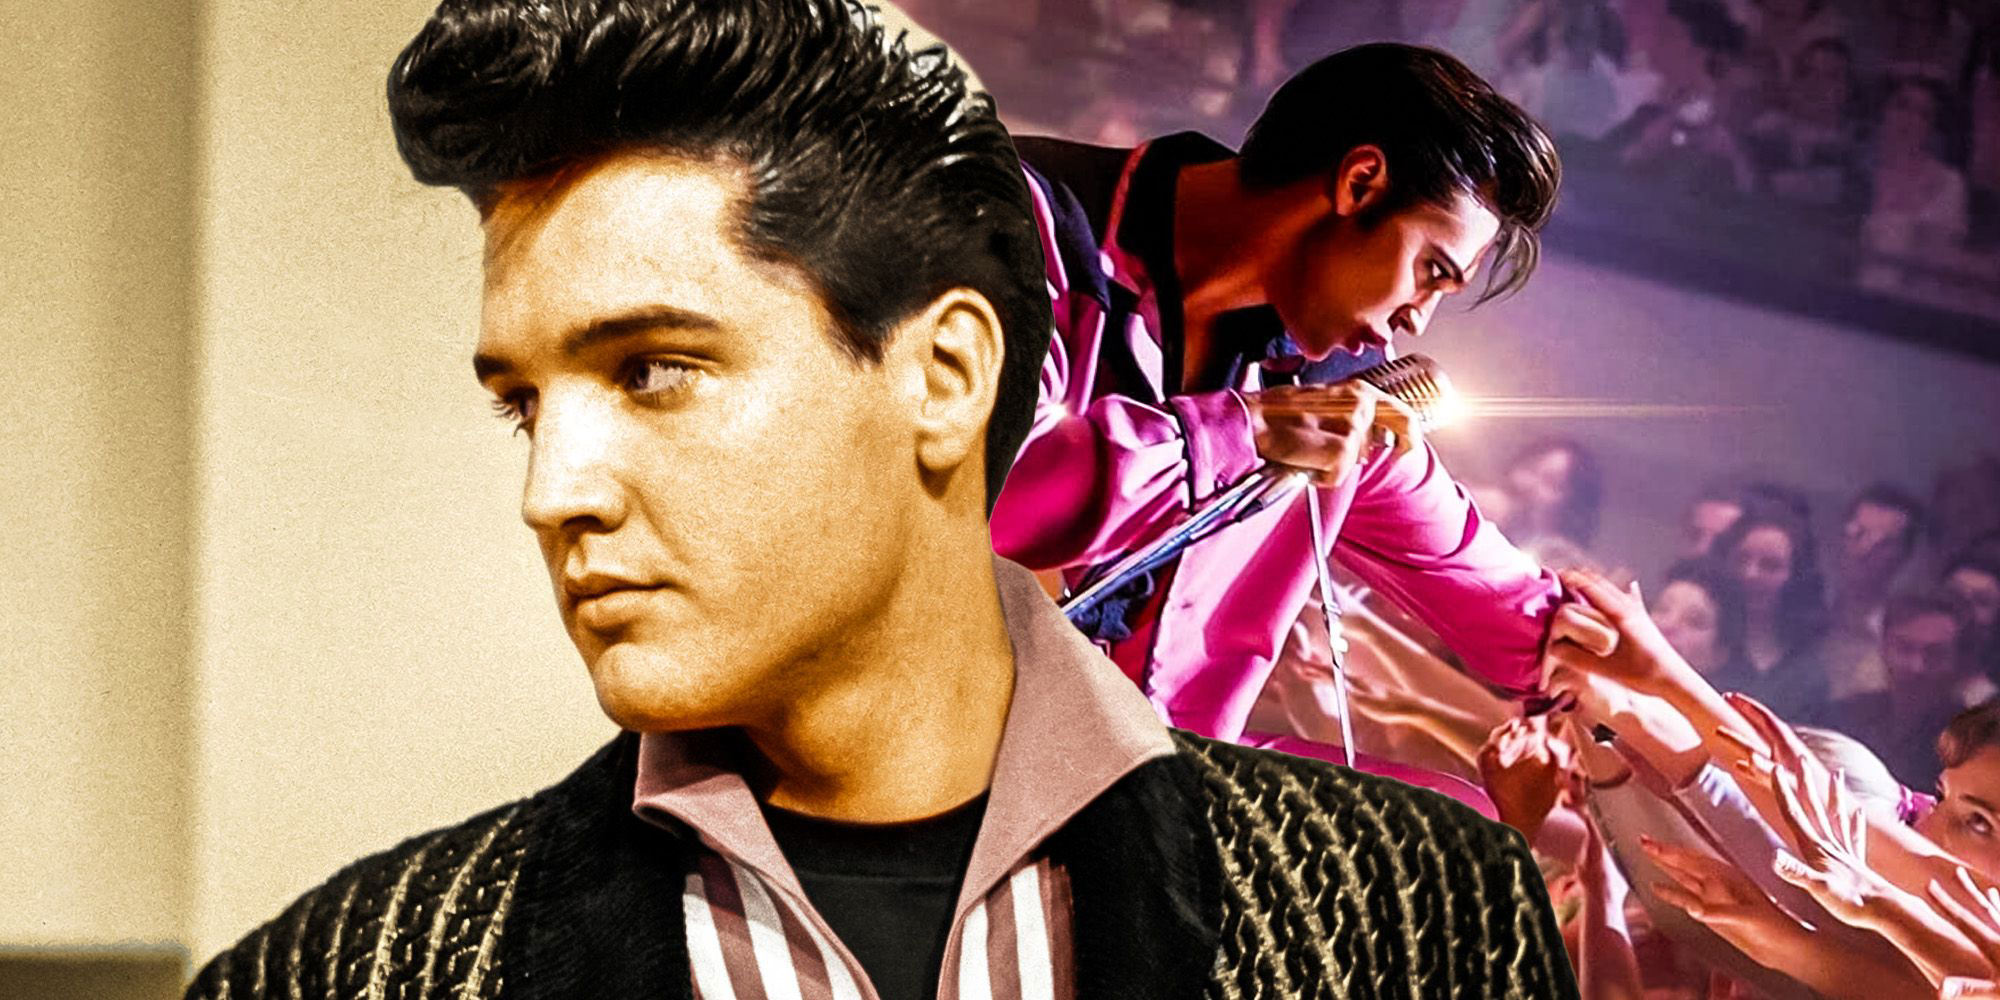 Elvis True Story How Accurate It Is & What The Movie Changes